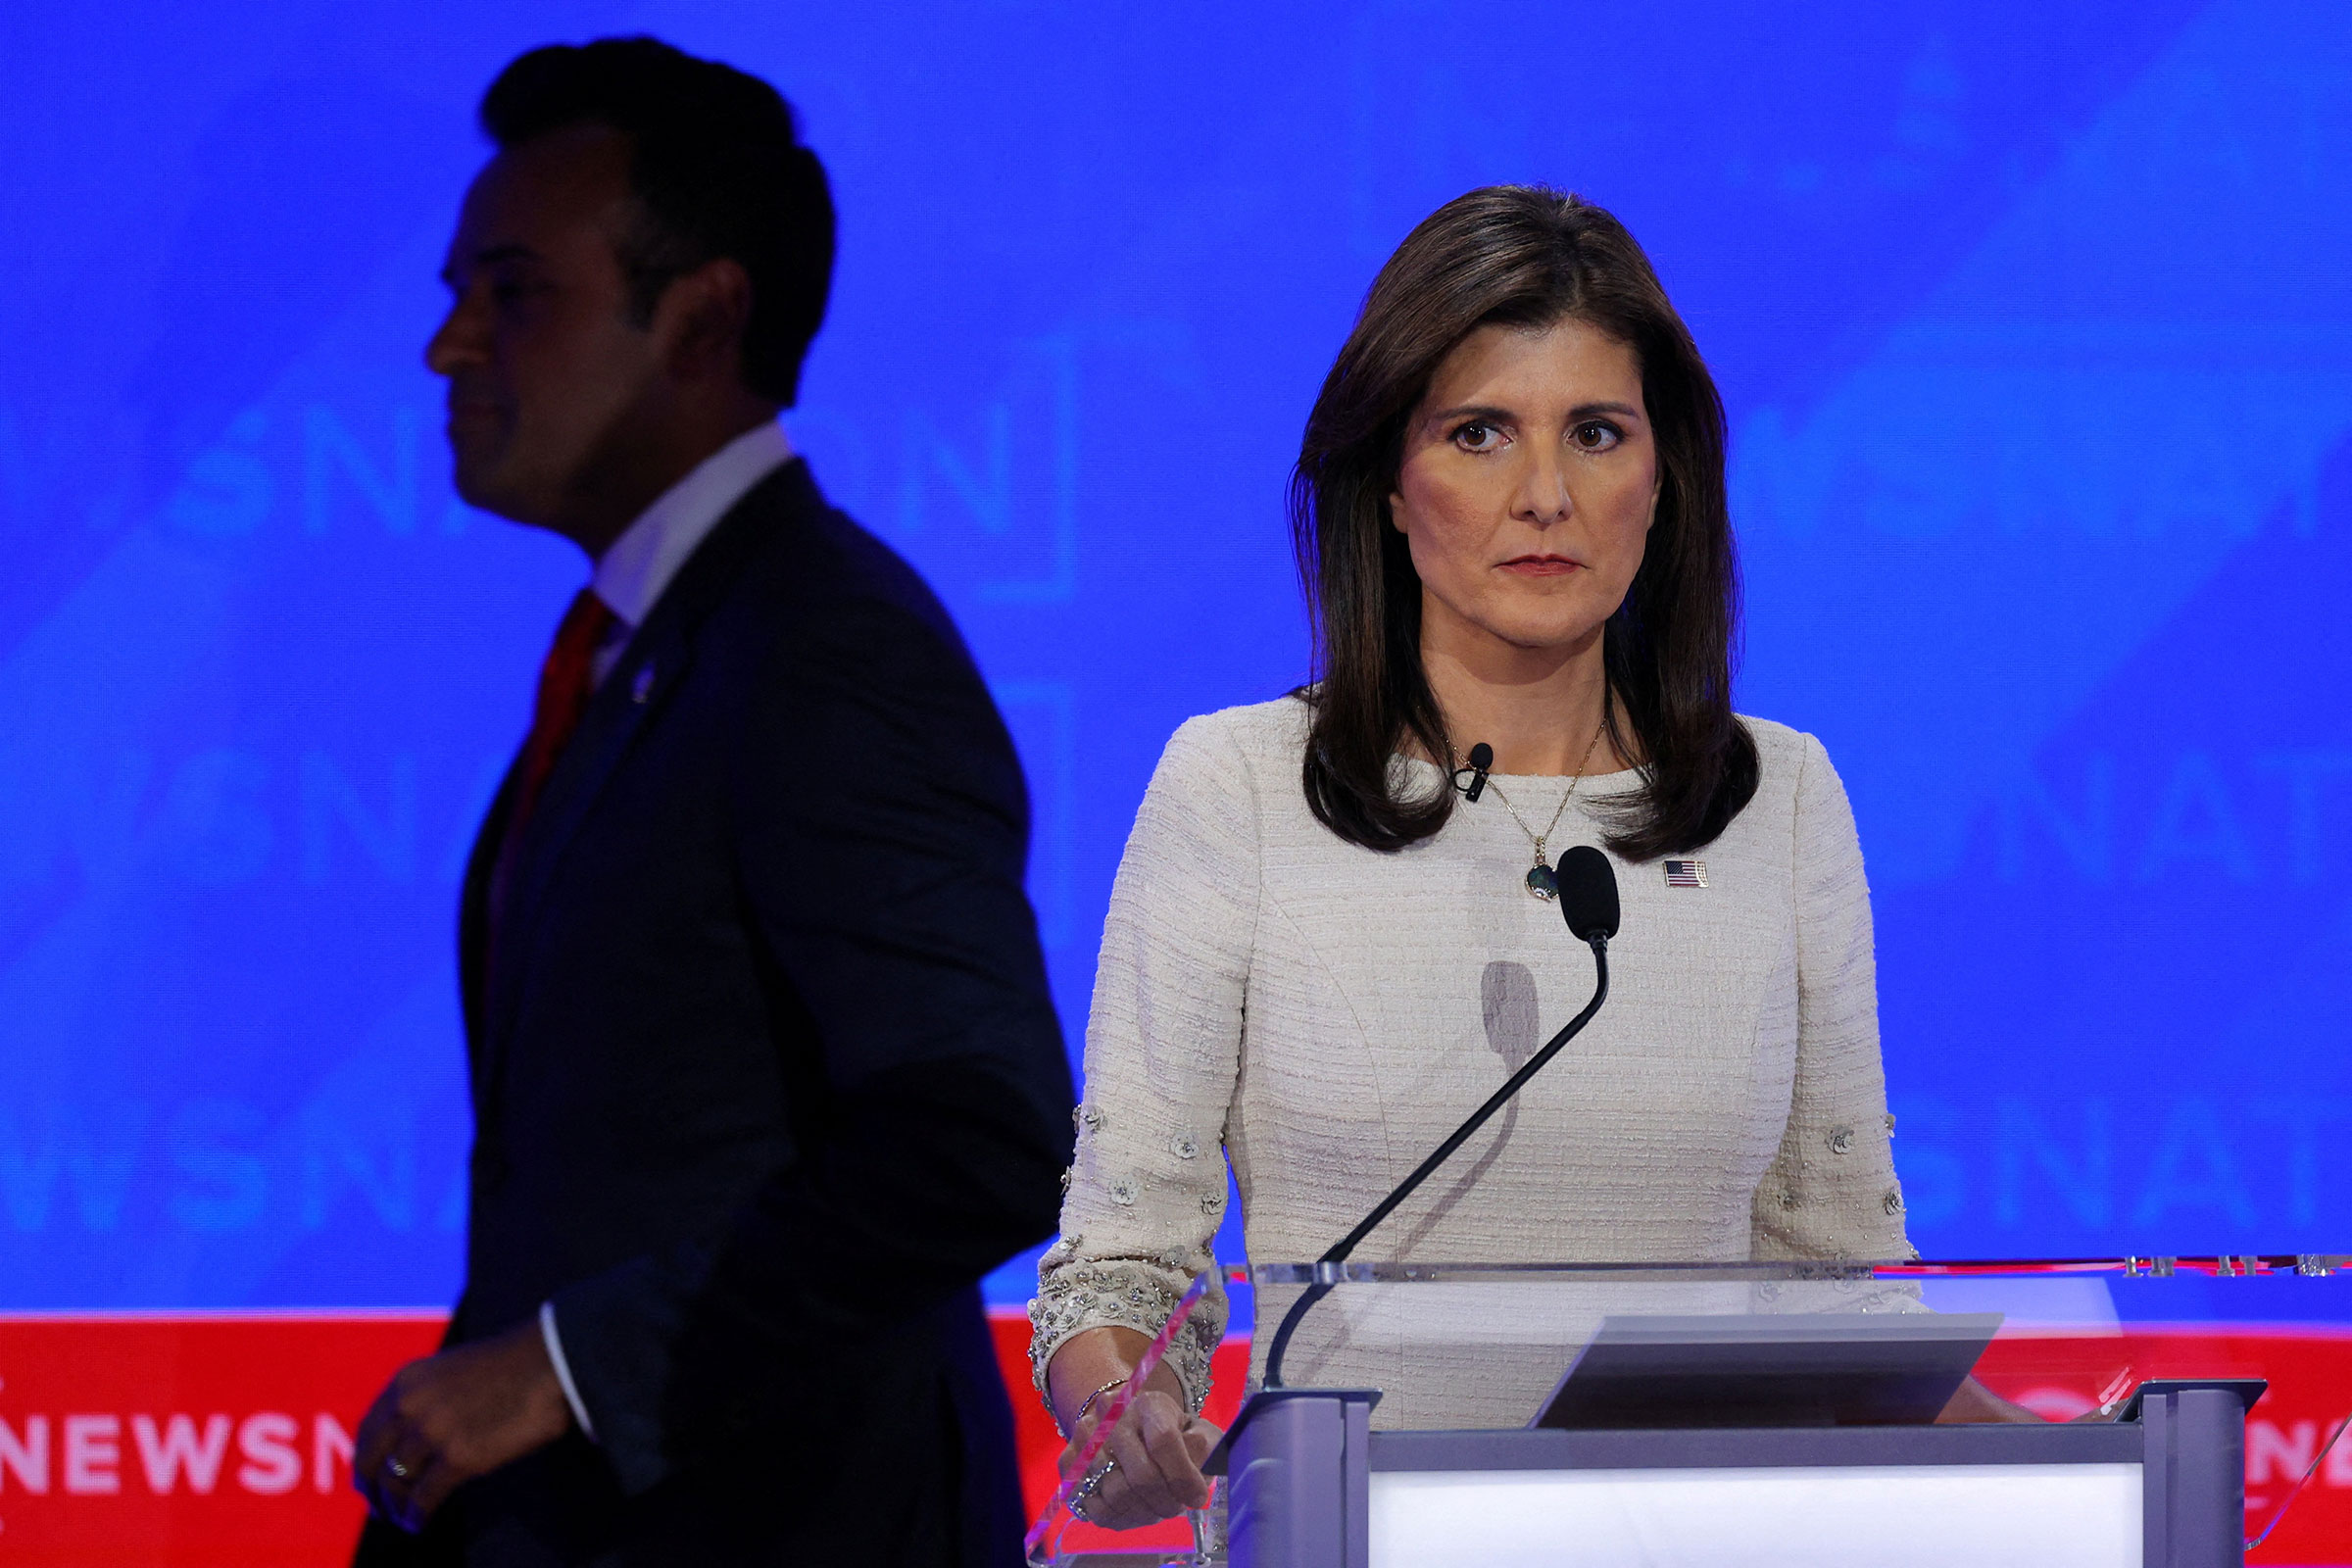 Nikki Haley looks on as Vivek Ramaswamy passes by during a break at the fourth Republican candidates' presidential debate at the University of Alabama in Tuscaloosa, Alabama, on December 6.